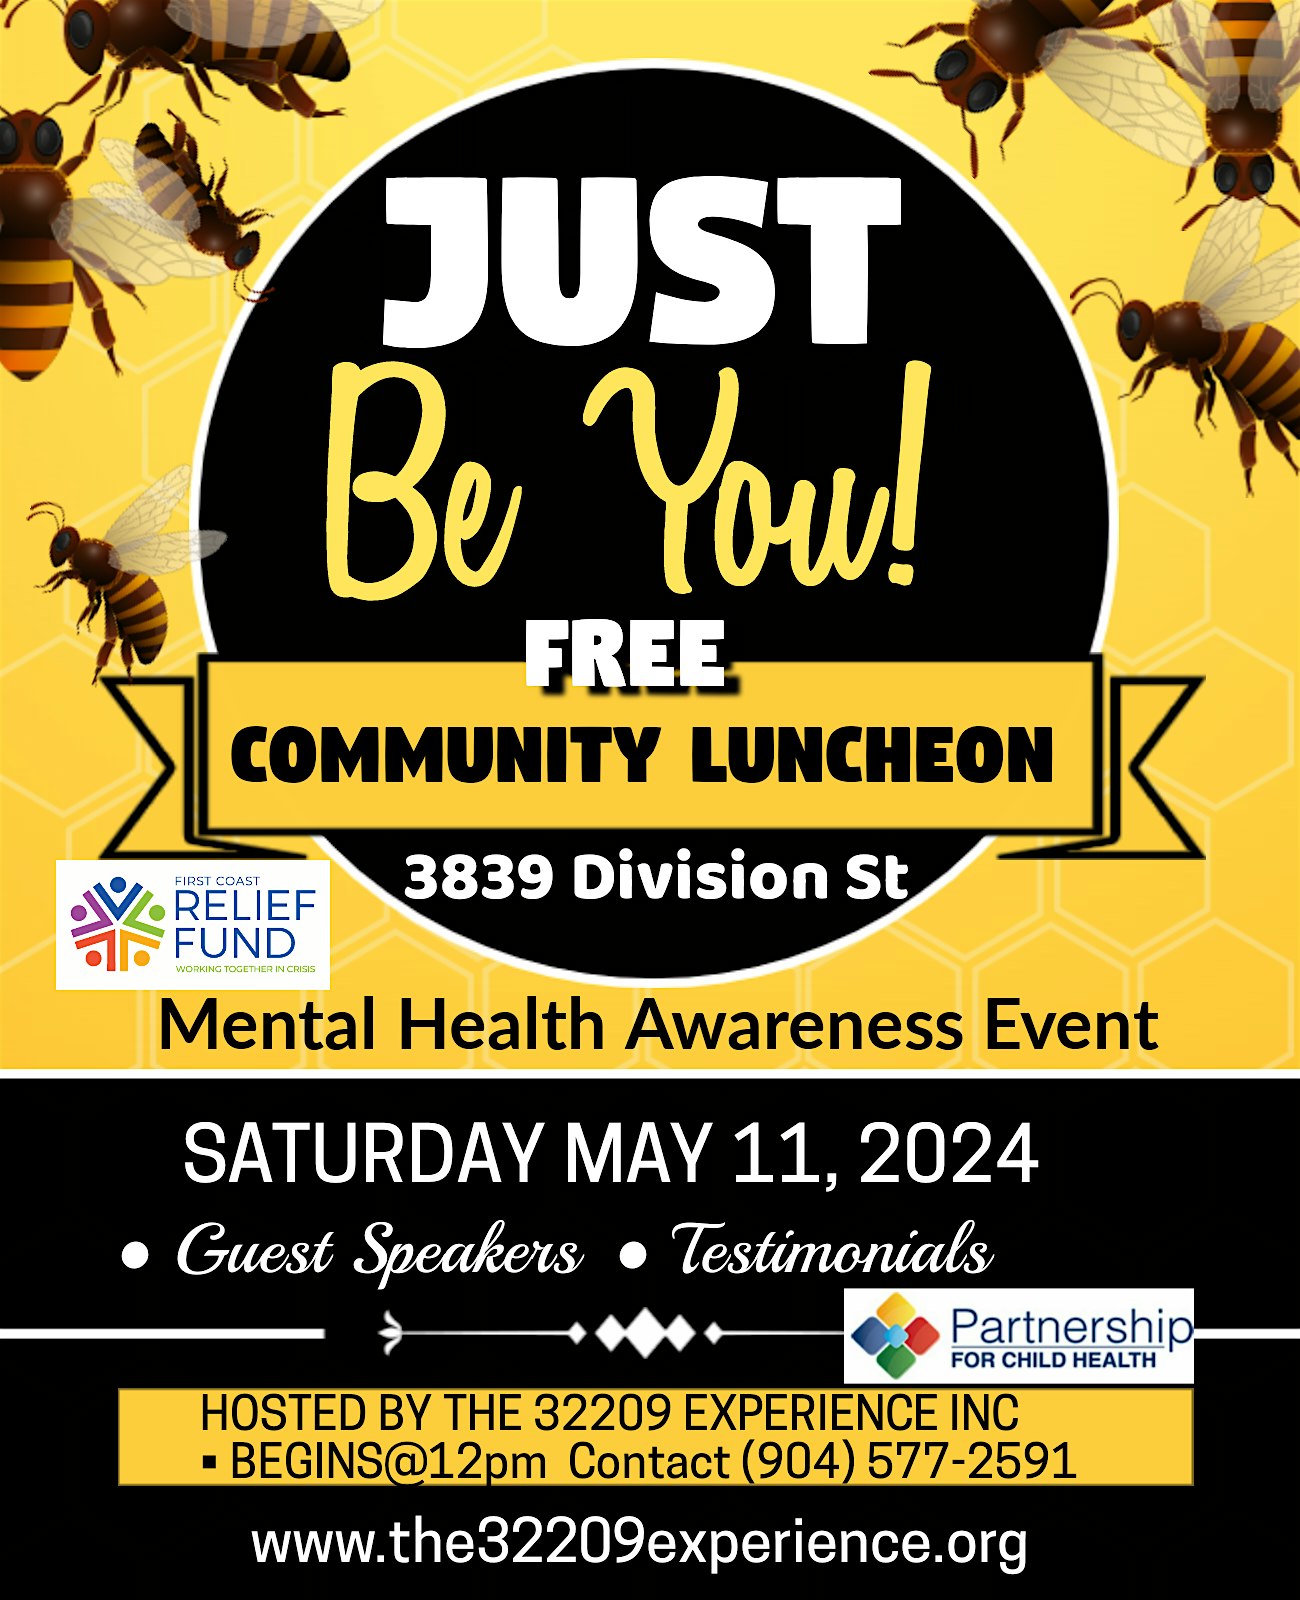 Just Be You! A Community Luncheon in observance of Mental Health Awareness